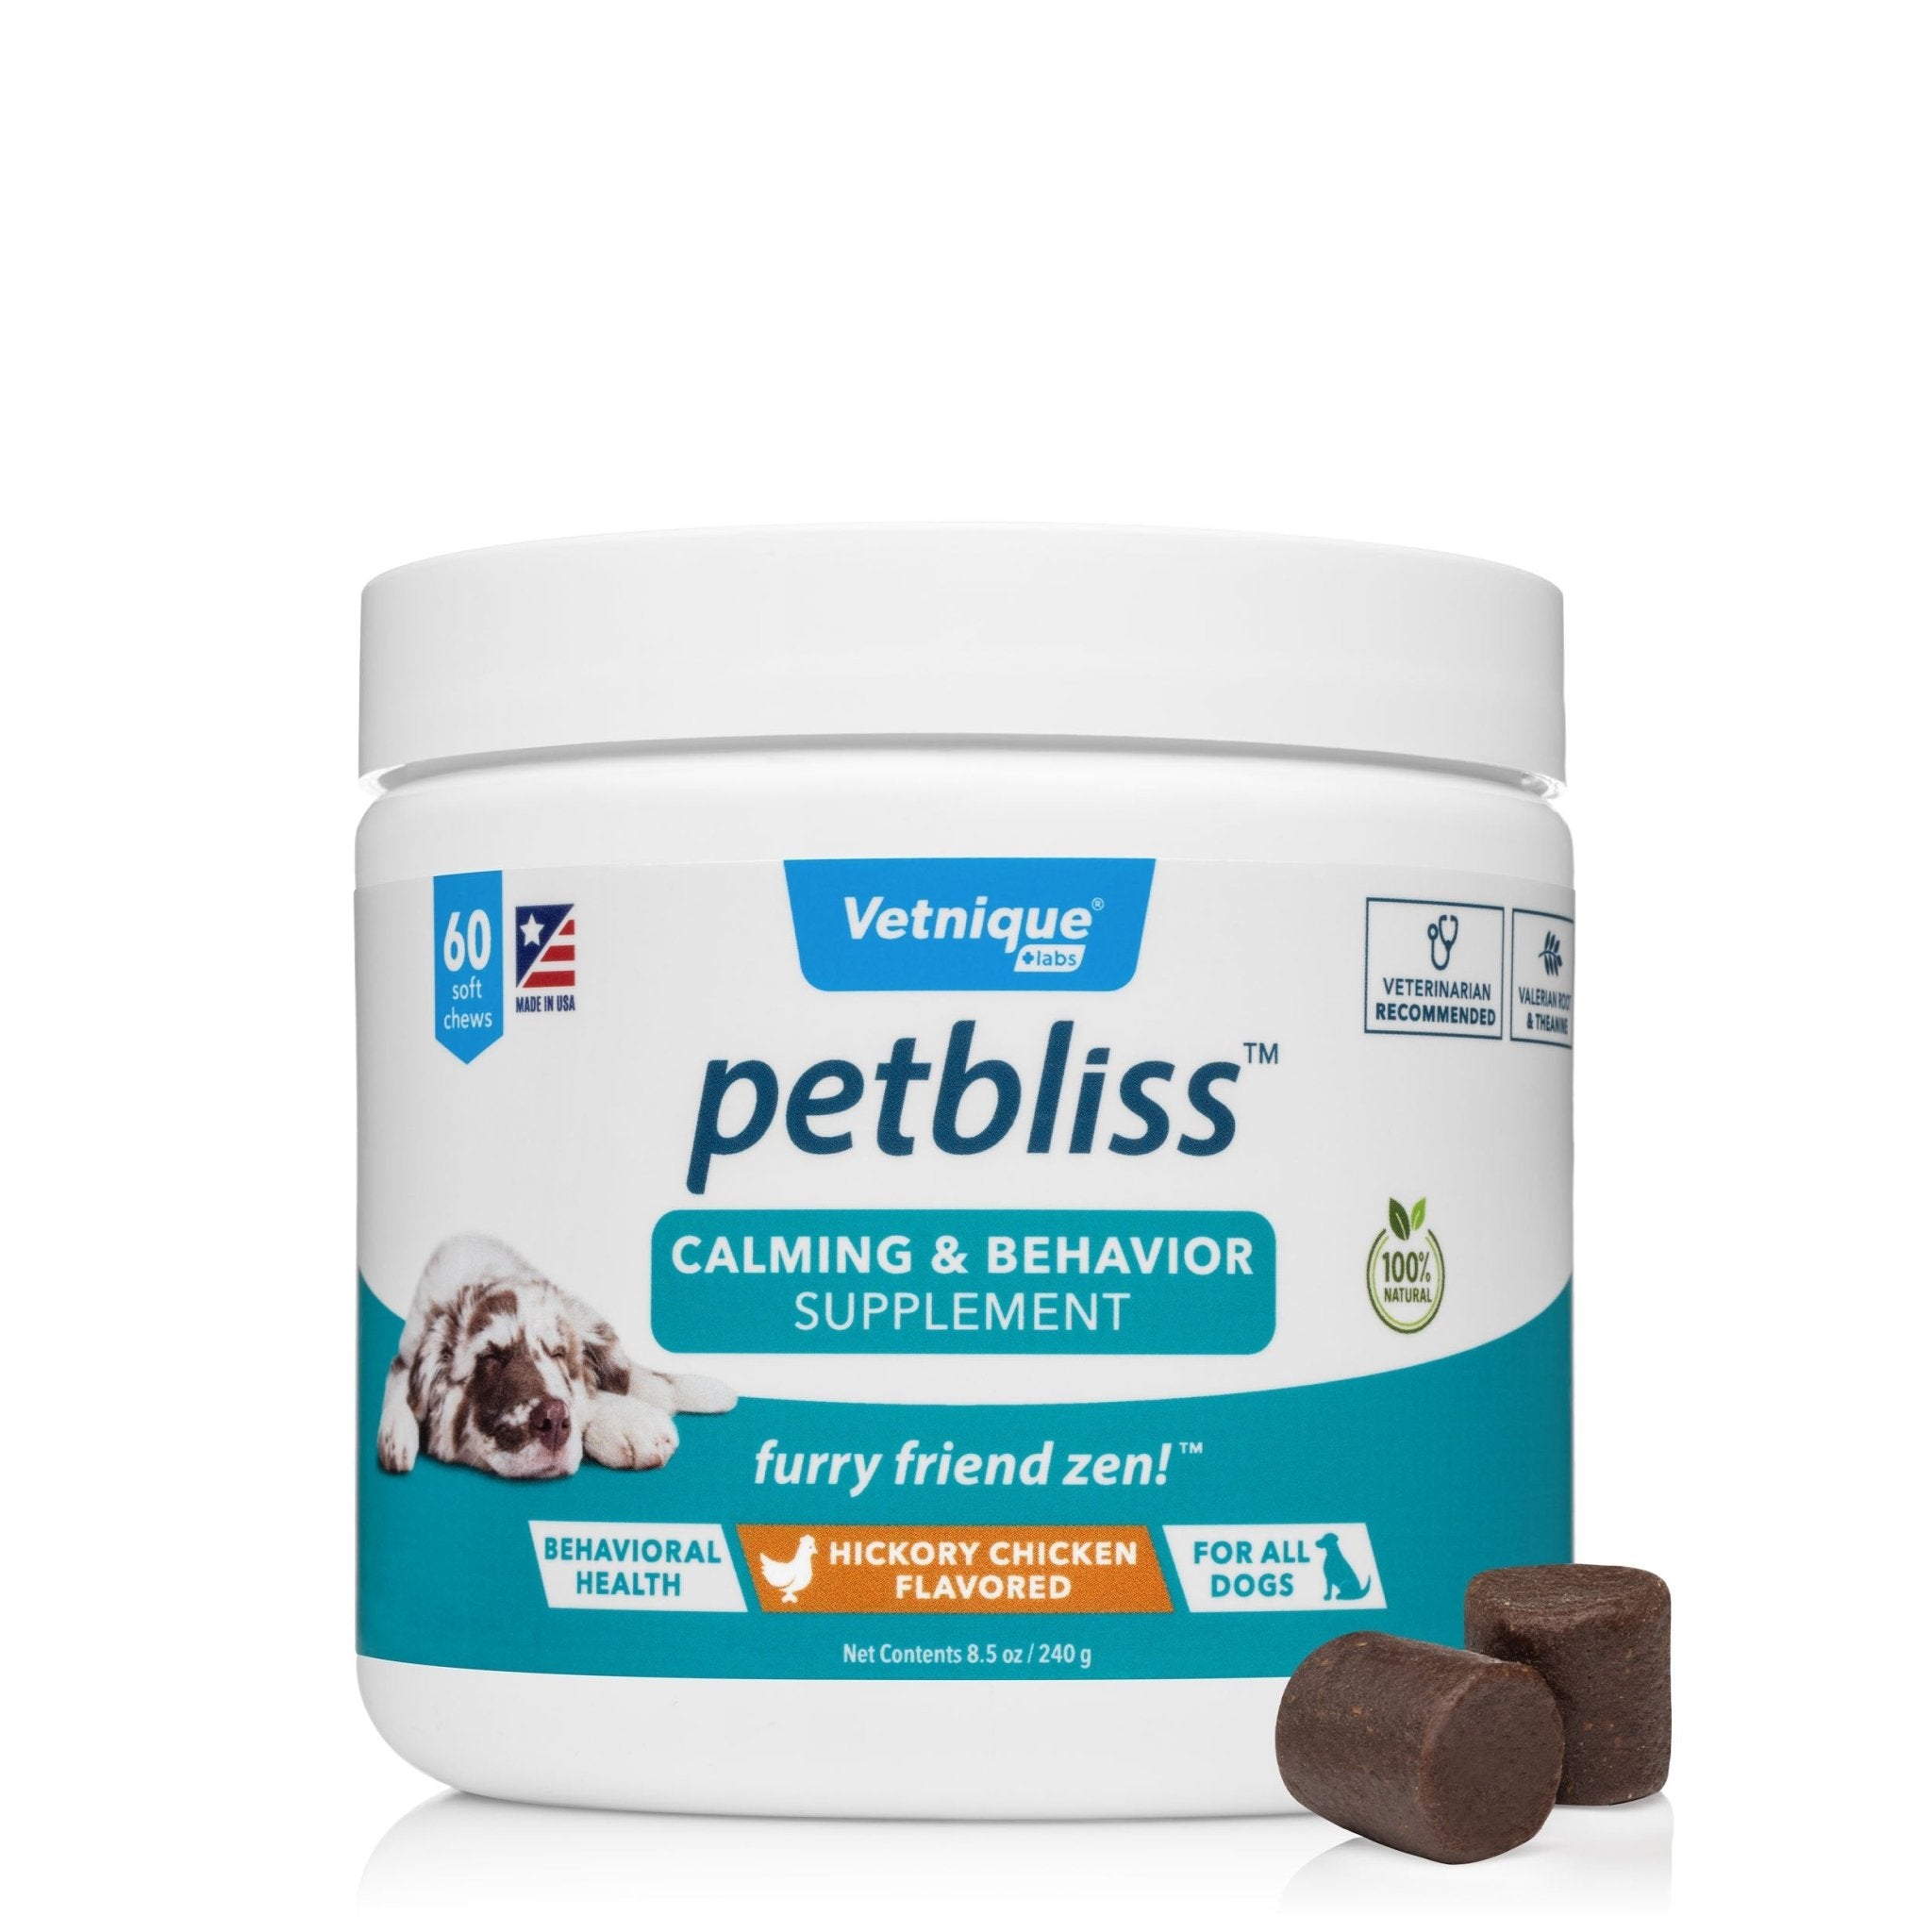 Petbliss ™ Calming & Behavior Supplement for Dogs - Bulletproof Pet Products Inc